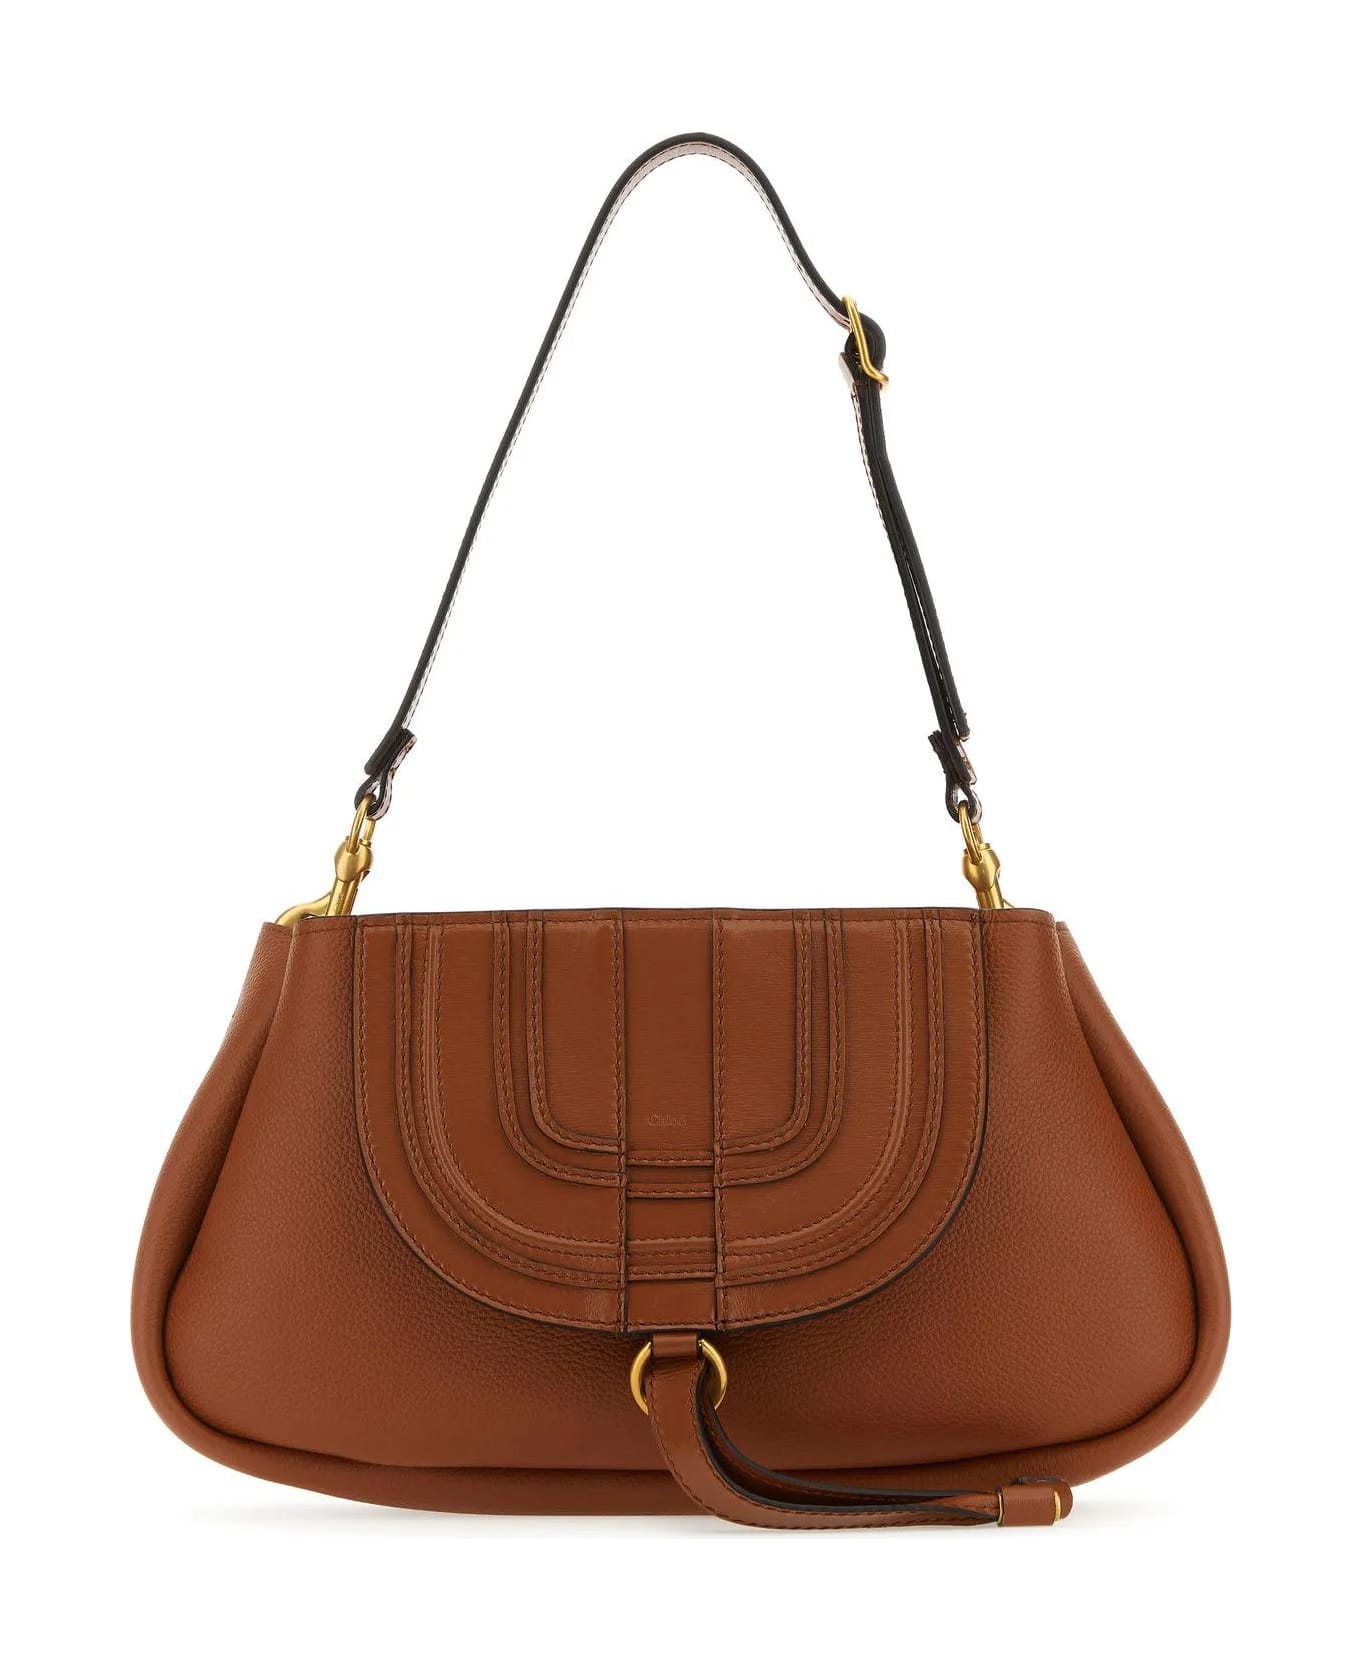 Chloé Brown Leather Marcie Clutch - Leather Brown